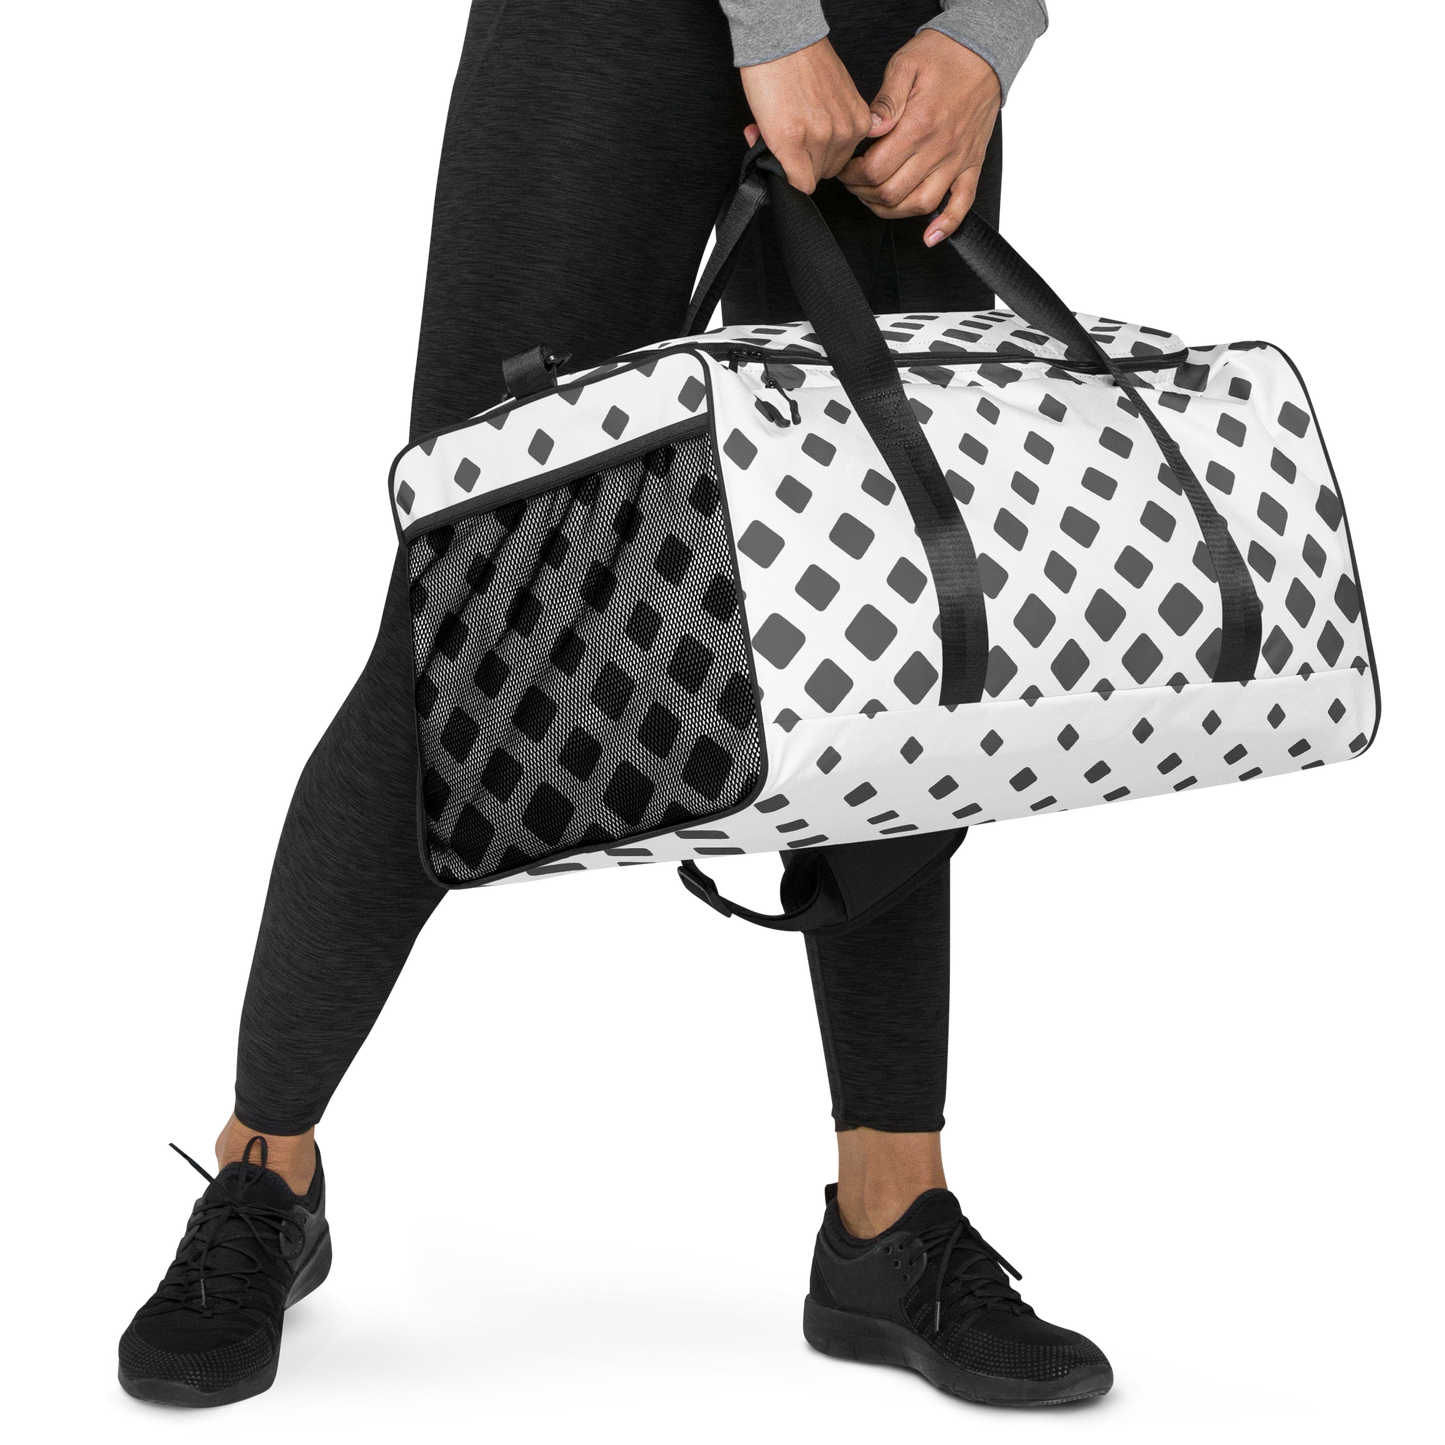 1Toptrend Design’s ode to the timeless and utilitarian duffel bag, the Travel Duffel is as beautiful as it is simple